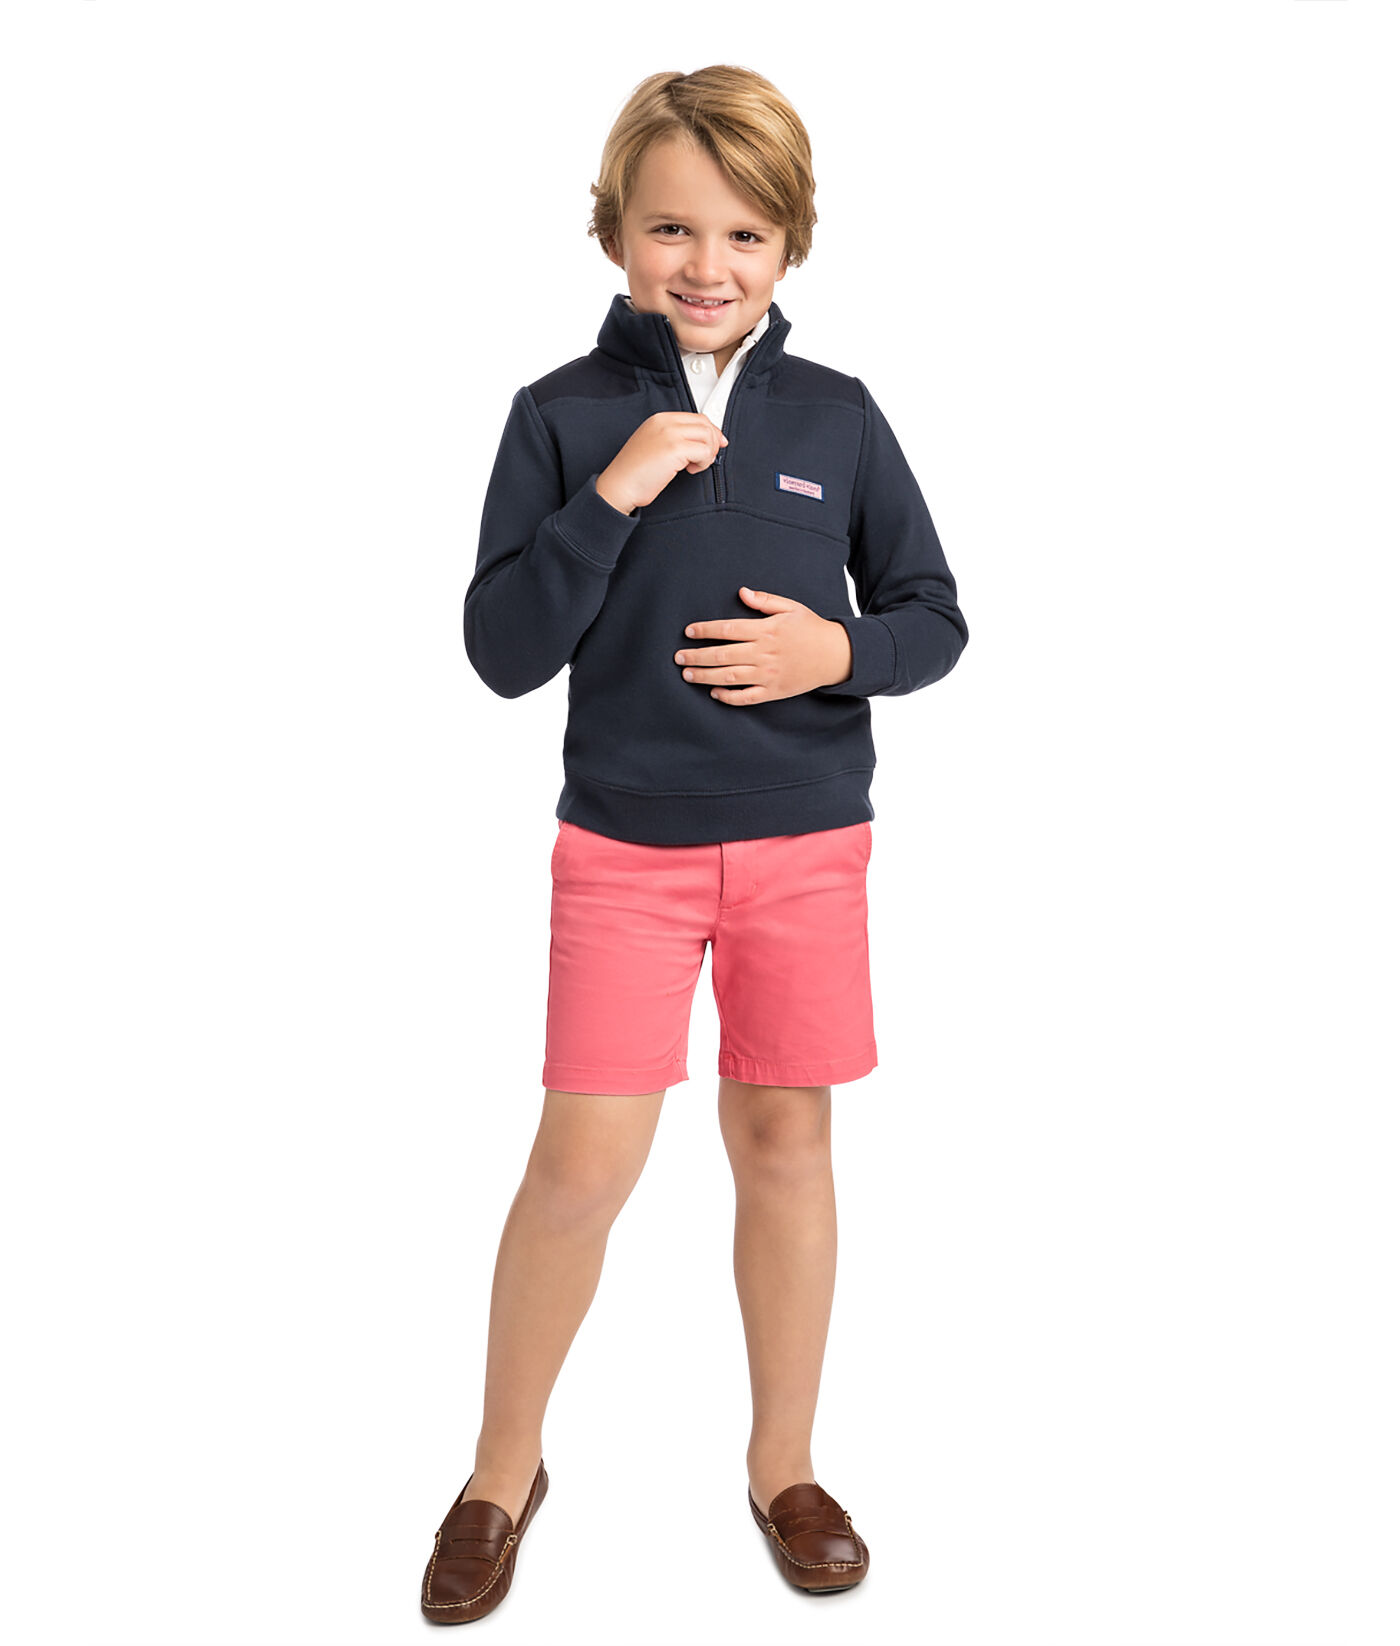 Vineyard Vines Youth Size Chart